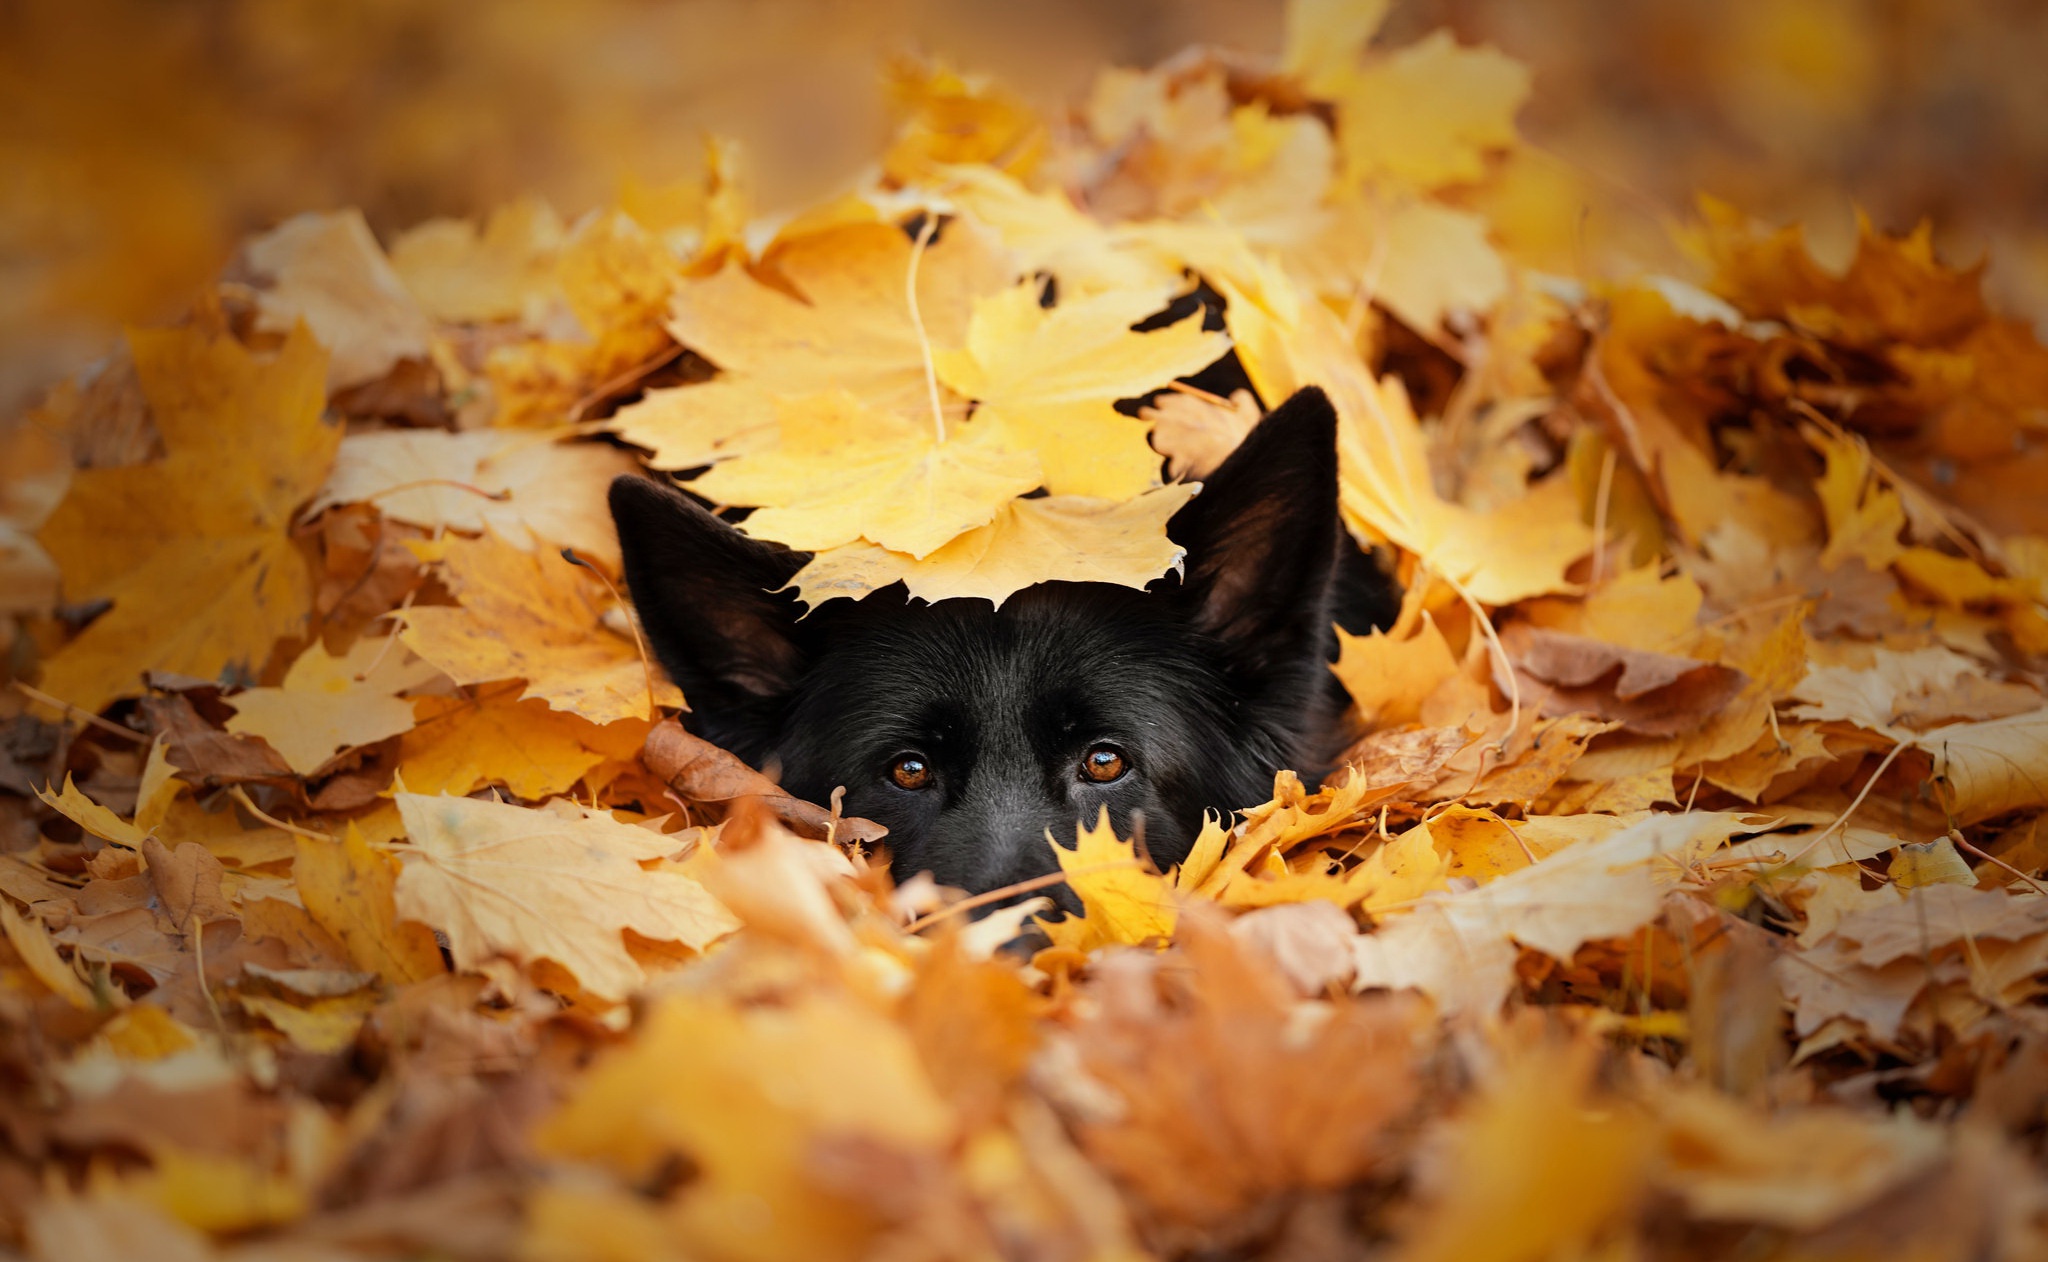 General 2048x1262 leaves dog animals fall outdoors